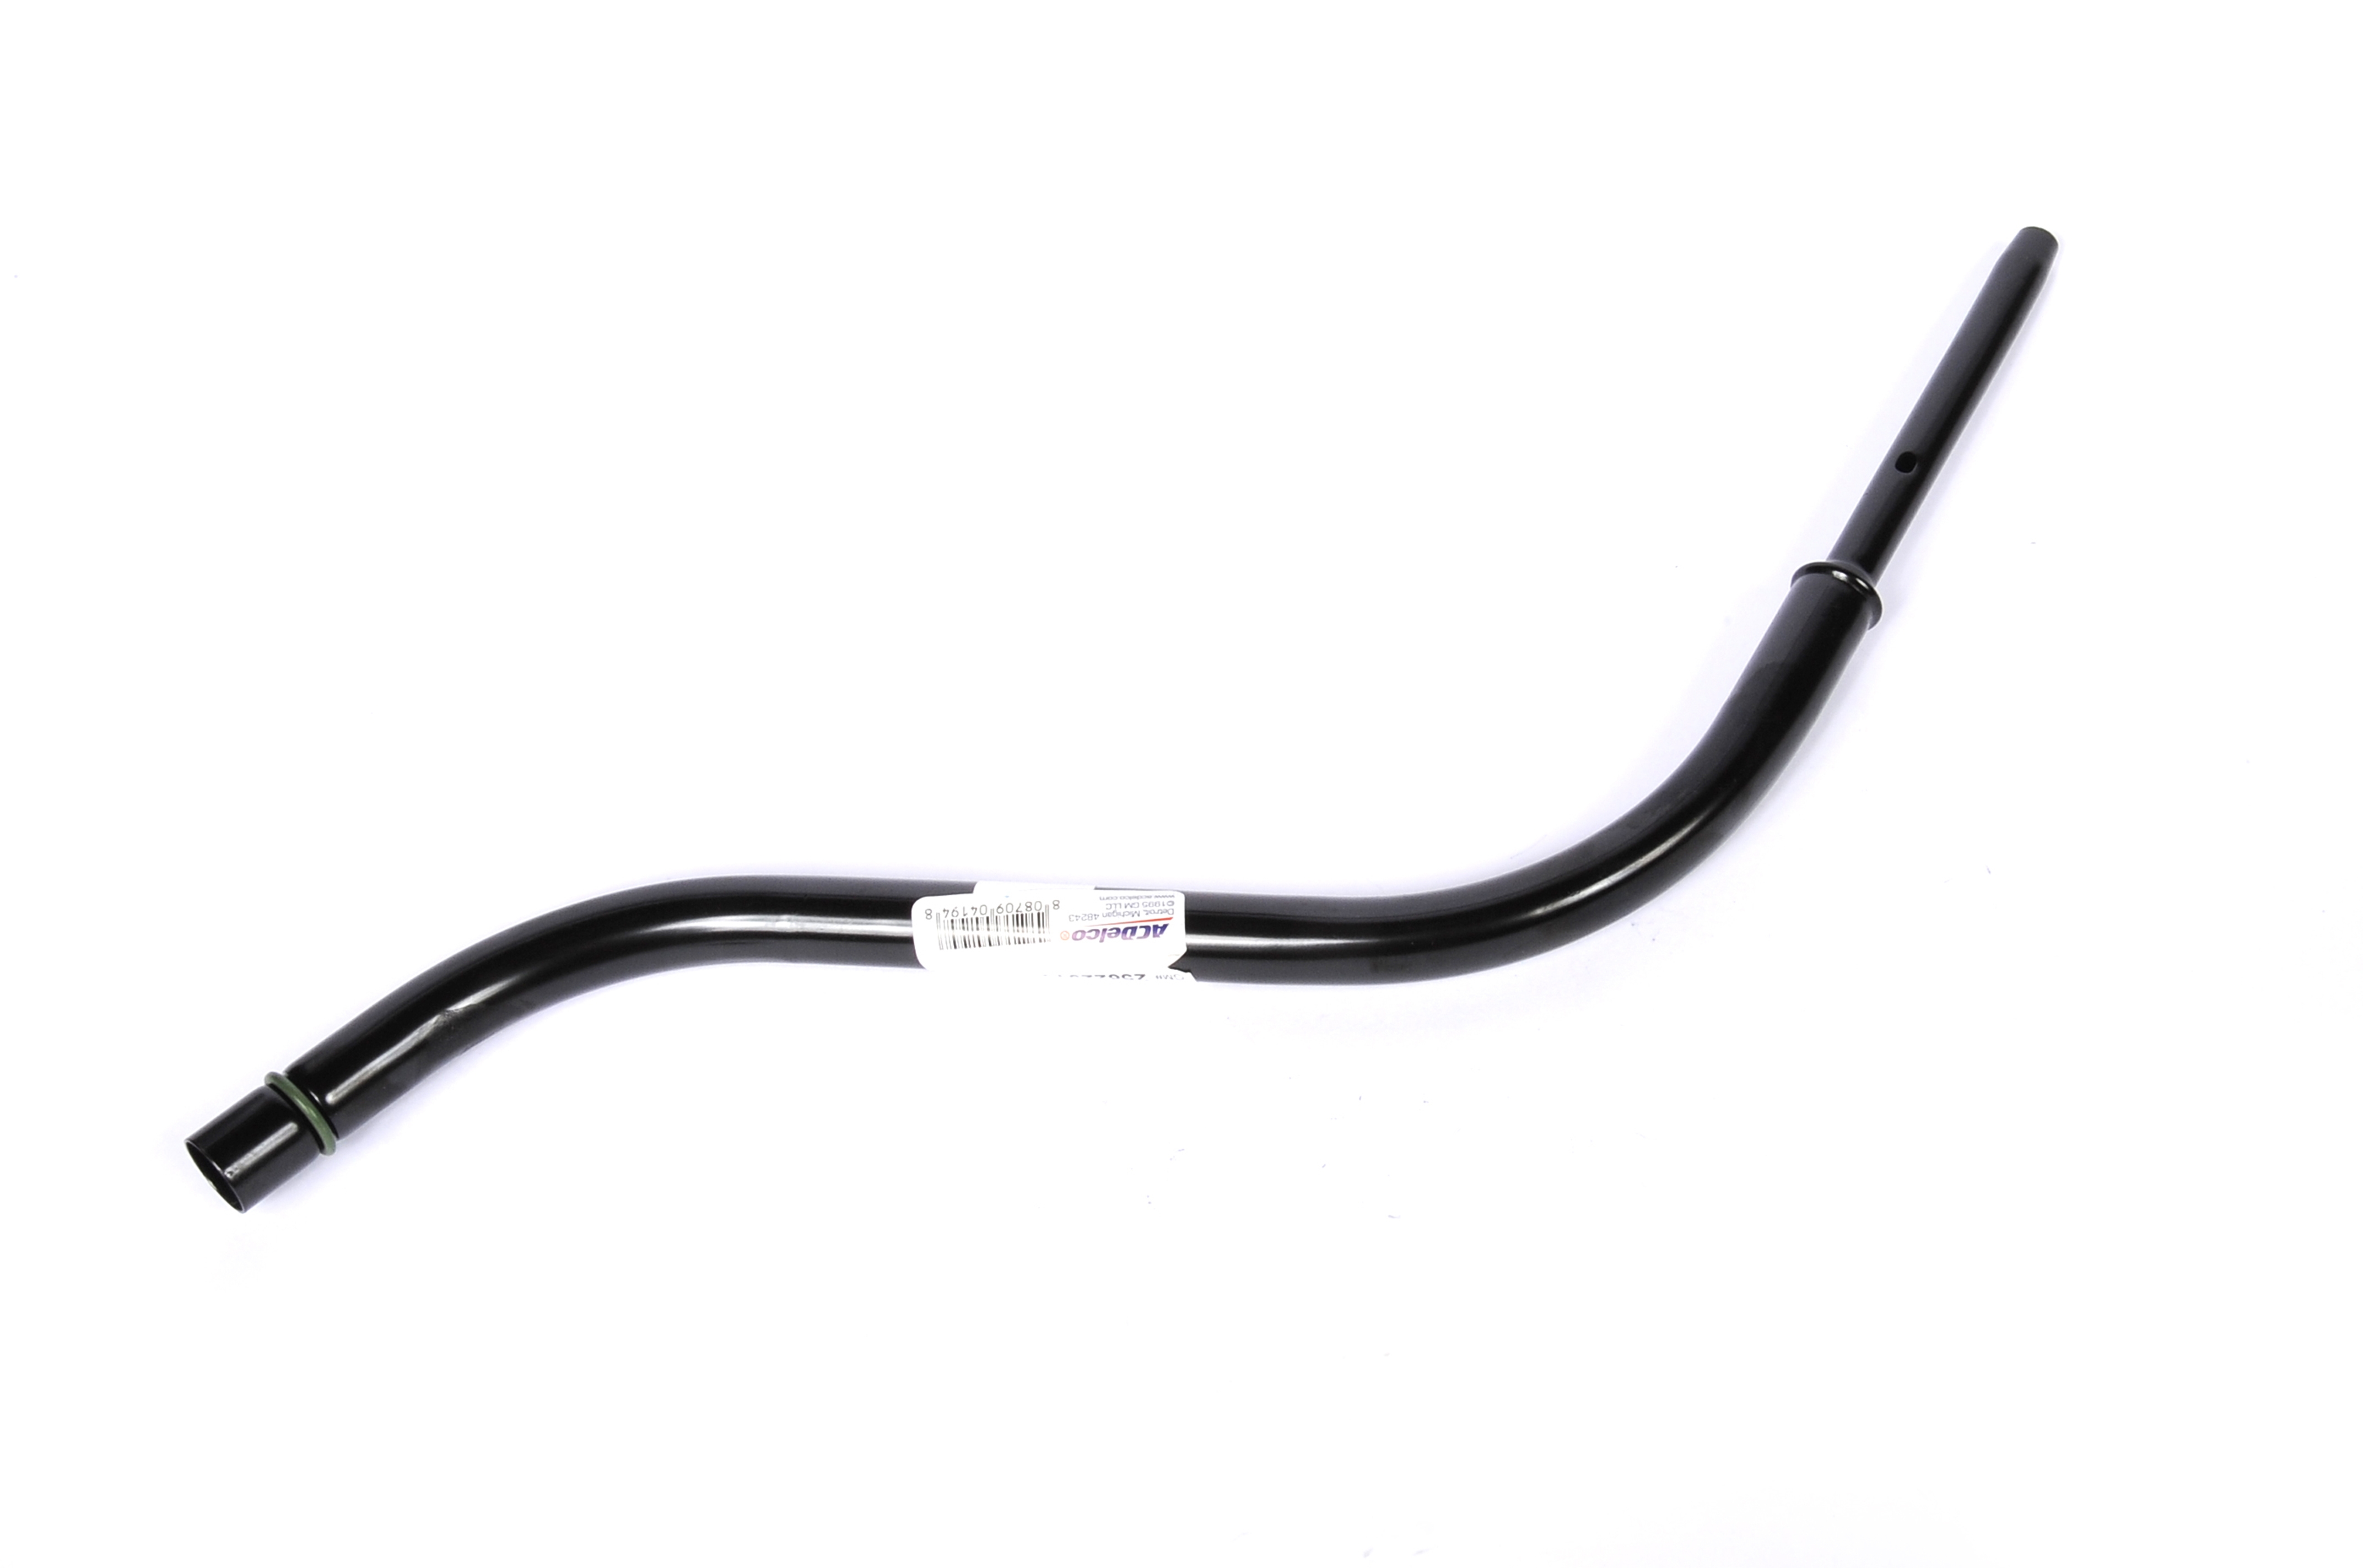 GM GENUINE PARTS - Automatic Transmission Fluid Filler Tube - GMP 25822914